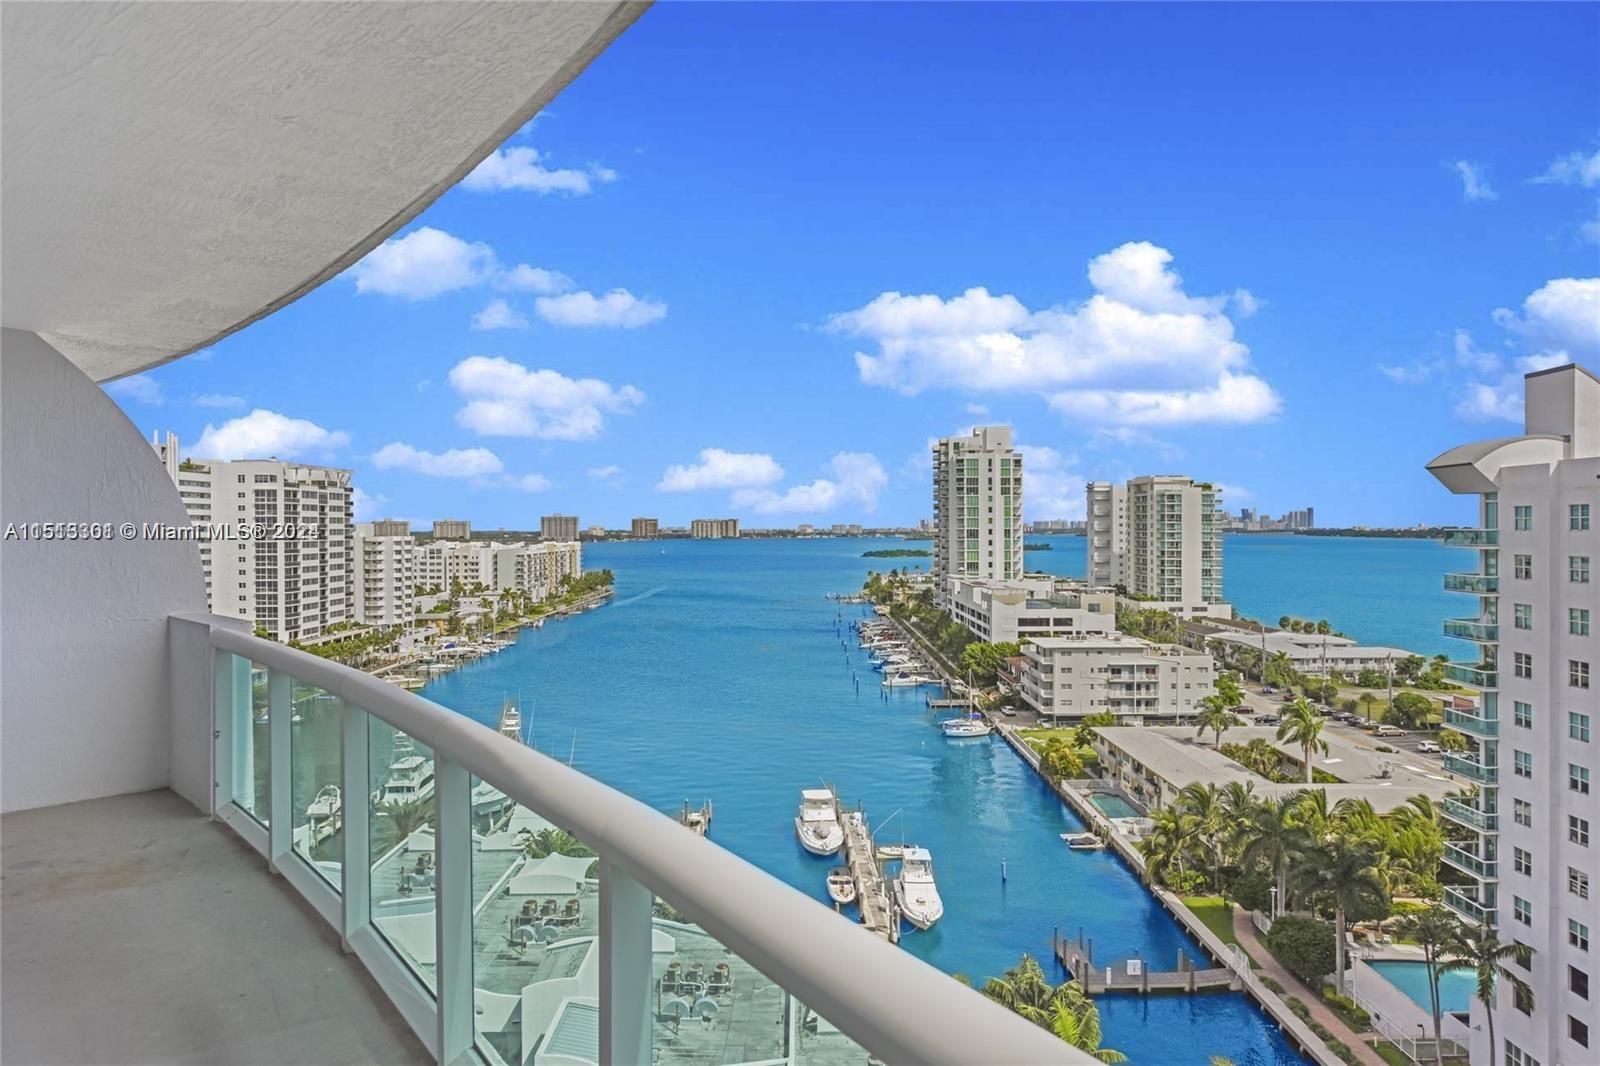 NO CURRENT OR SCHEDULED ASSESSMENTS.  GREAT INVESTMENT. Spectacular open views of Biscayne Bay in the Harbor Island gem of North Bay Village . This spacious @ bedroom 2 bath split floor plan offers impact glass doors and windows to enjoy the stunning bay views from all rooms, kitchen with granite countertops, and SS appliances, master bath with whirlpool tub with separate standing shower and double vanity. 360 Condominium is a gated, luxury condominium offers a variety of amenities including a private marina, two pools, a fitness center, 24-hour security, free valet parking for residents, guests and more! Rented $3200 Through June 30, 2024 with absolutely great tenants. SEE BROKER REMARKS.